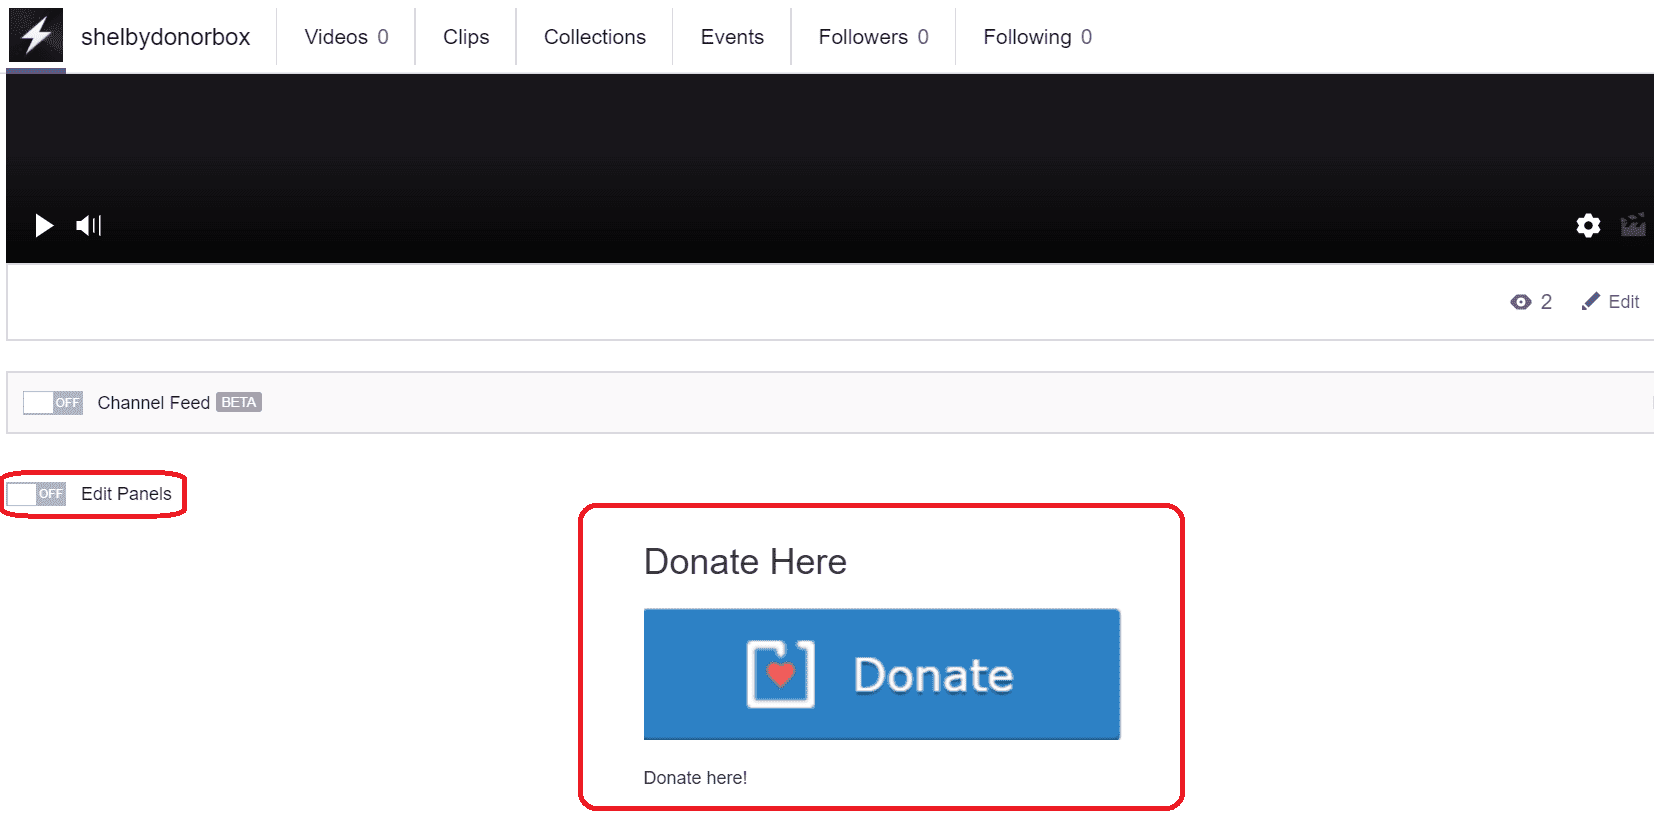 More About How to Donate on Twitch in Detail